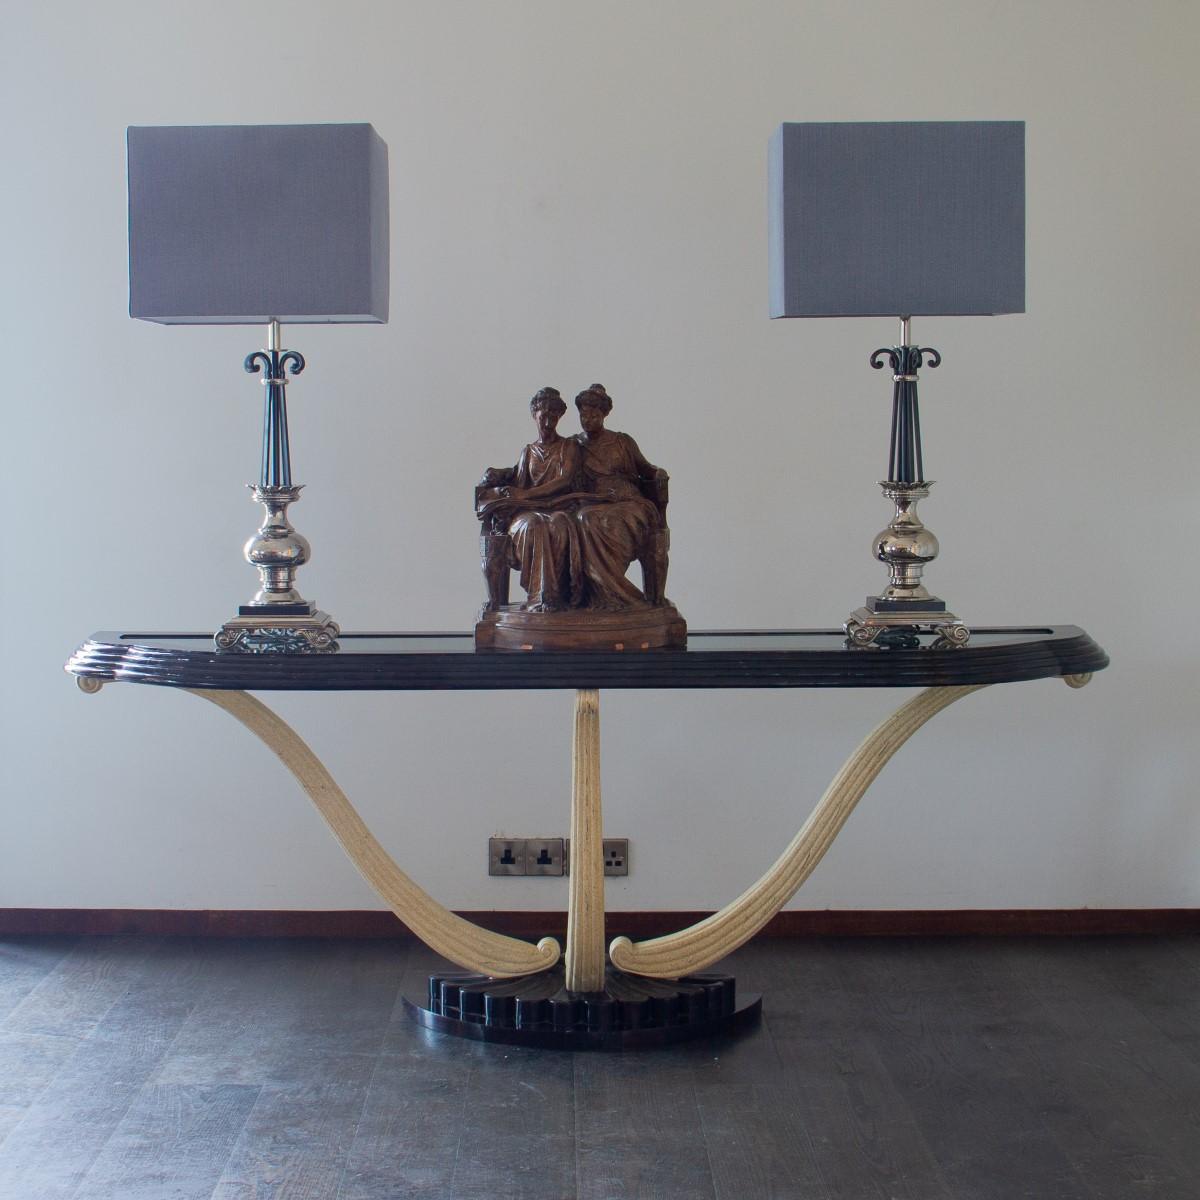 A rare Maitland Smith designed tortoiseshell veneered console table with three painted cabriole supports set on a fan shaped base. The top has a stepped finish and an inset glass top, 1980s

Maitland Smith was established in 1979. They used highly